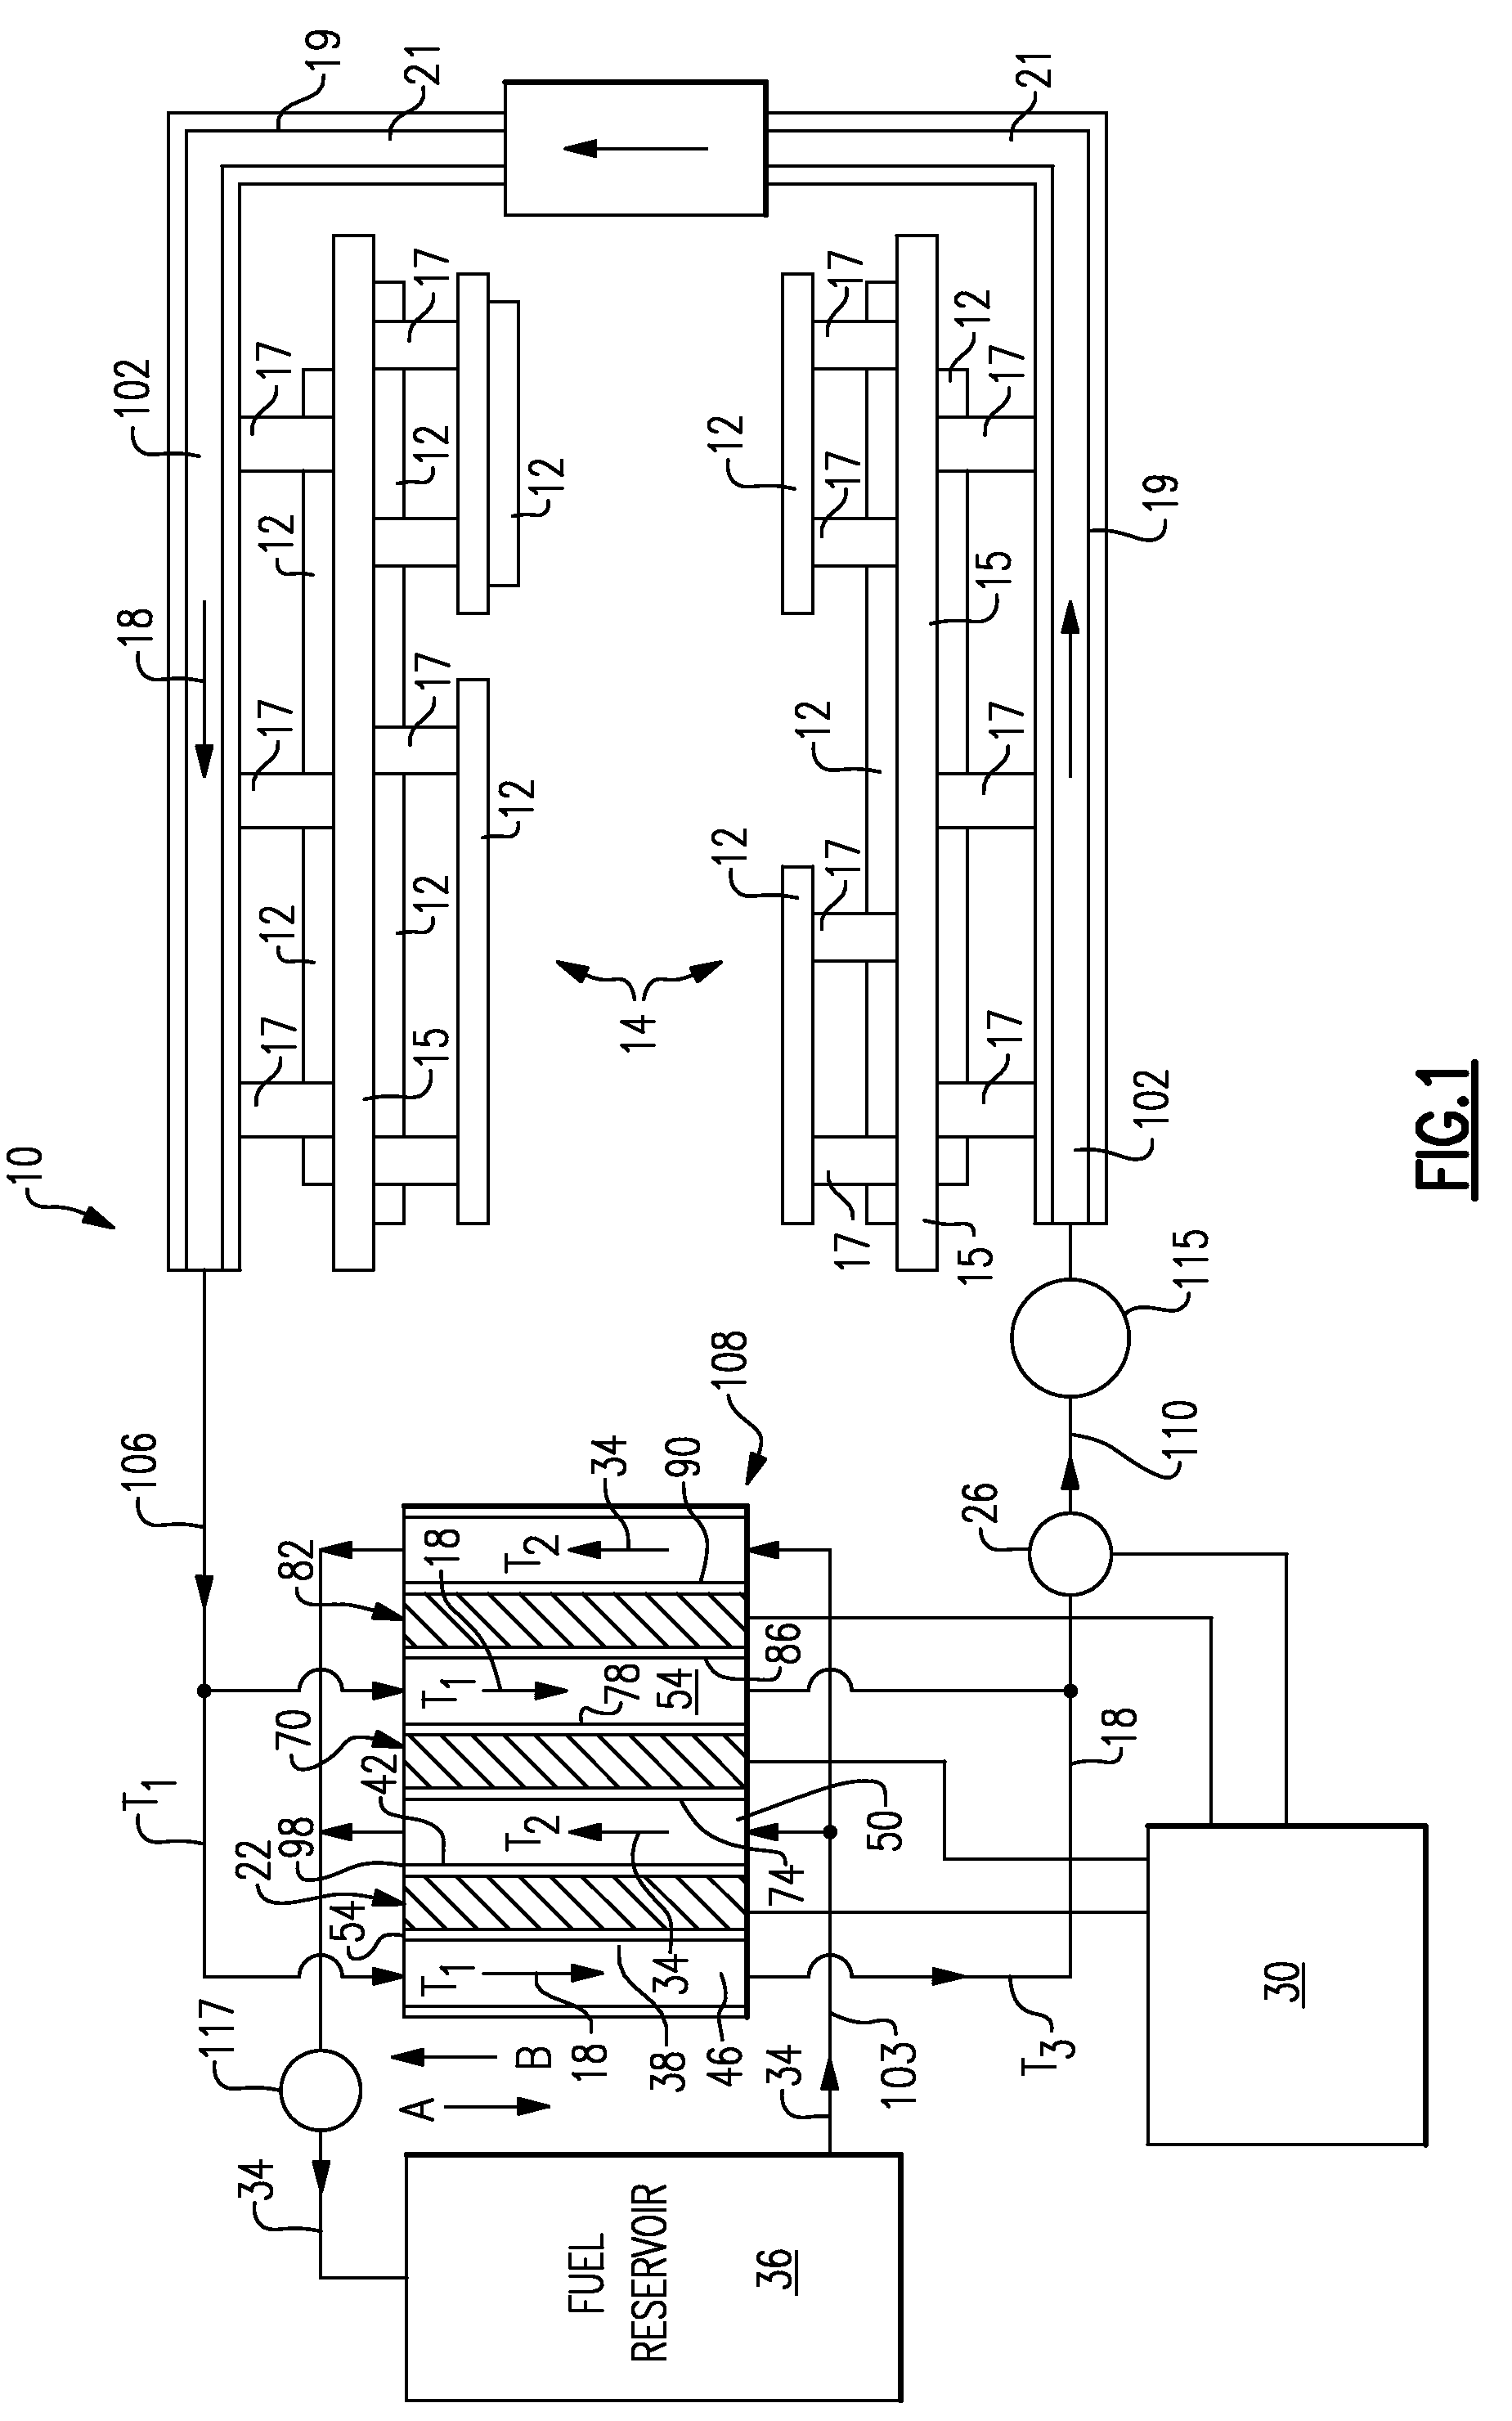 Heat exchanger assembly for an aircraft control